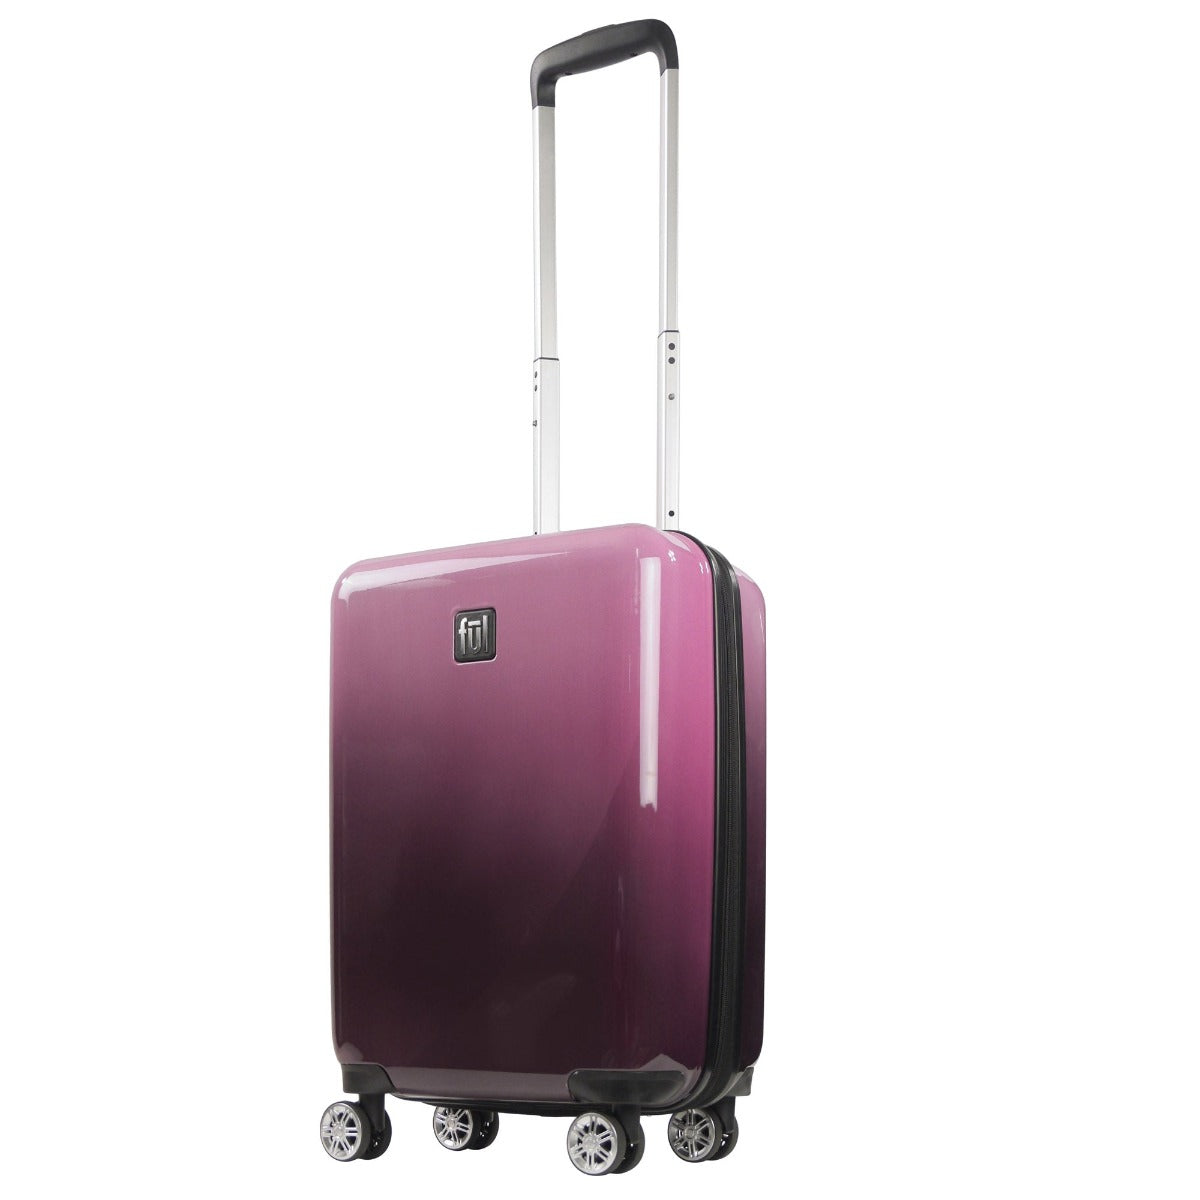 Pink Ful Impulse Ombre hard-side spinner suitcase 22" luggage